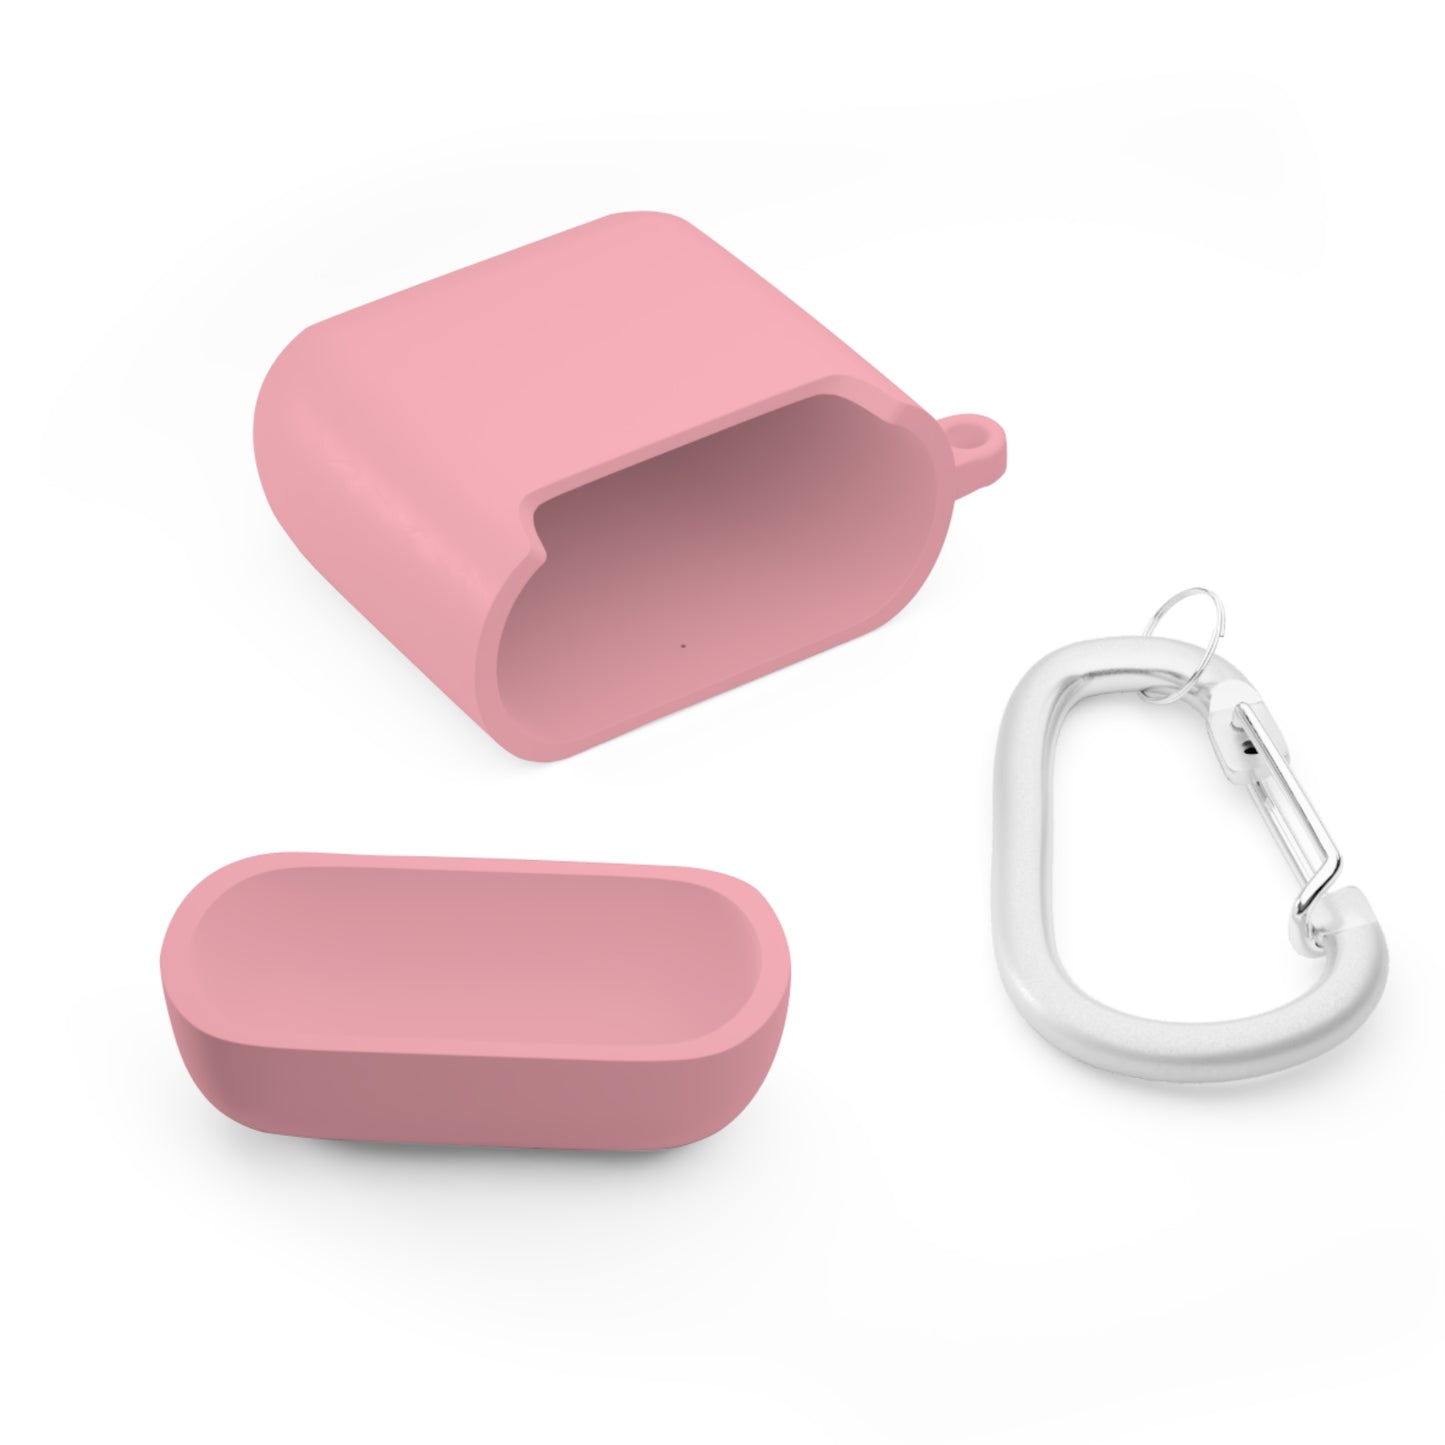 God Is The Wind Beneath My Wings Airpod / Airpods Pro Case cover